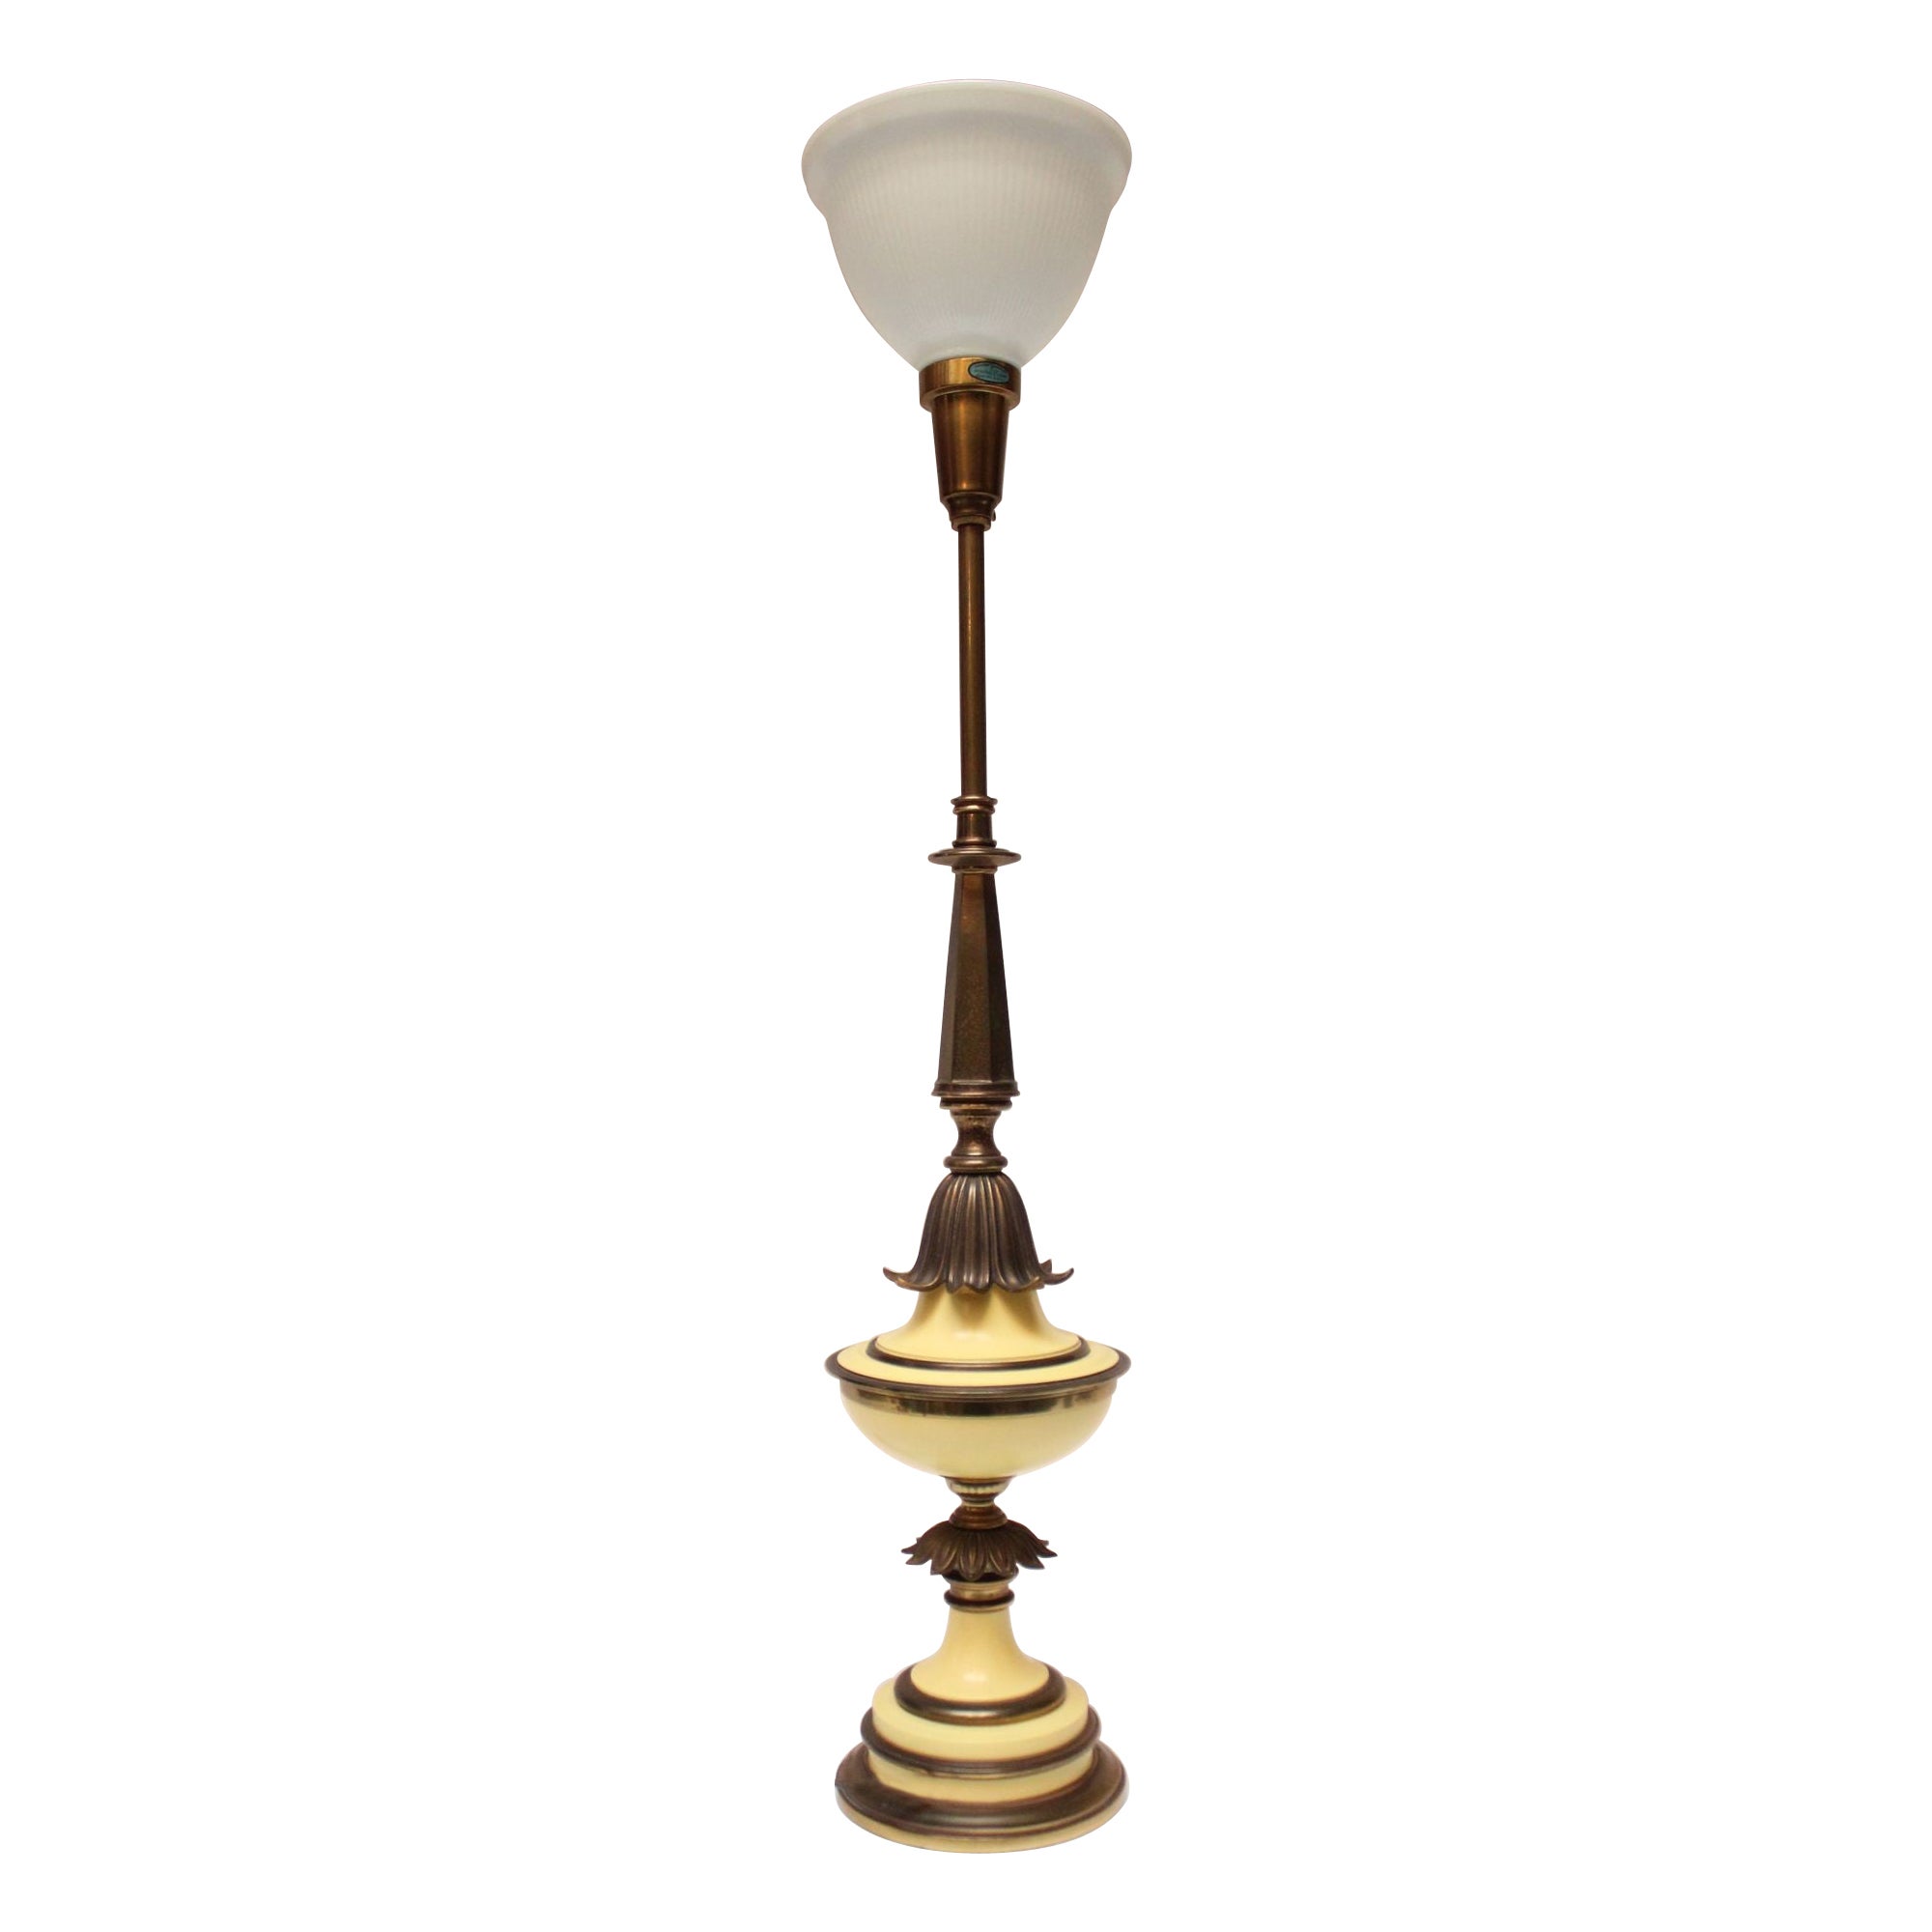 Hollywood Regency-Style Brass and Glass Table Lamp by Stiffel